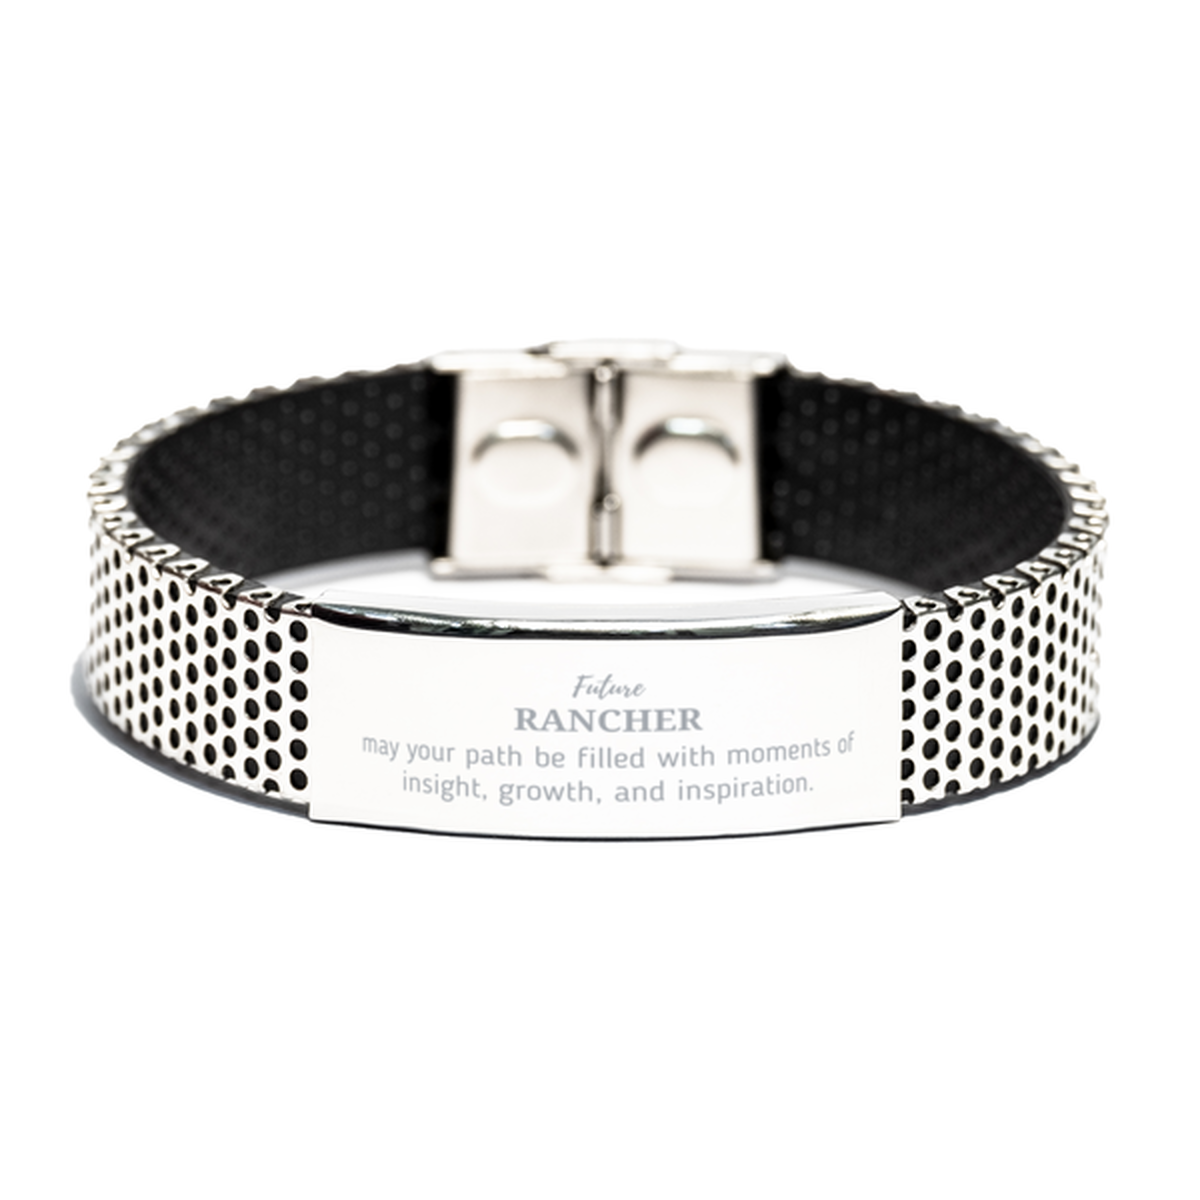 Future Rancher Gifts, May your path be filled with moments of insight, Graduation Gifts for New Rancher, Christmas Unique Stainless Steel Bracelet For Men, Women, Friends